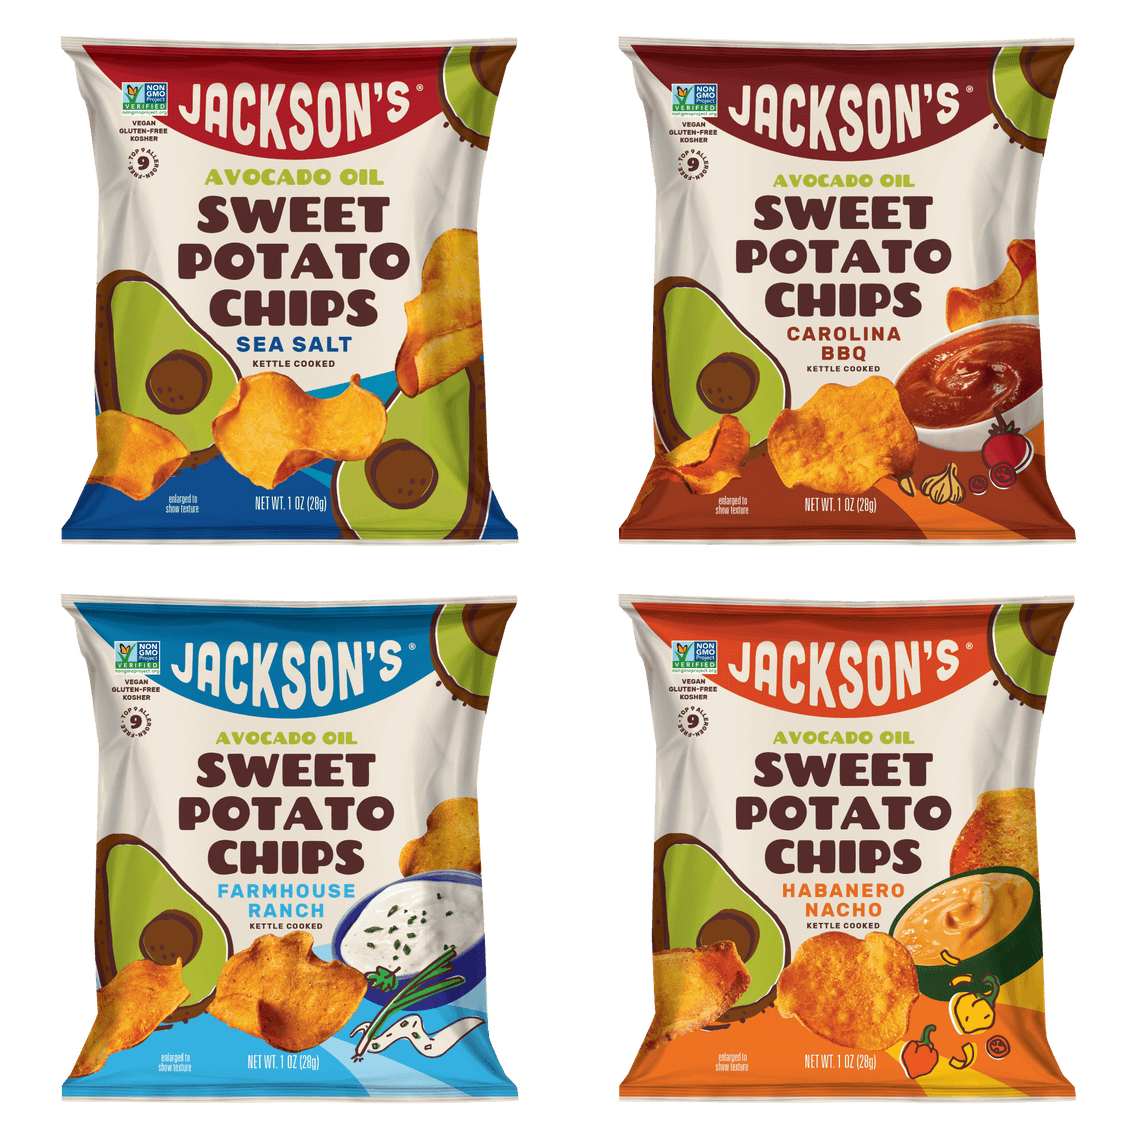 Epic Flavors Snack Box 4 Bags of Kettle Cooked Sweet Potato Chips, Cooked in Avocado Oil, Non-GMO, Keto, Paleo, Gluten-Free, Vegan, Kosher, Free of Top 9 Allergen